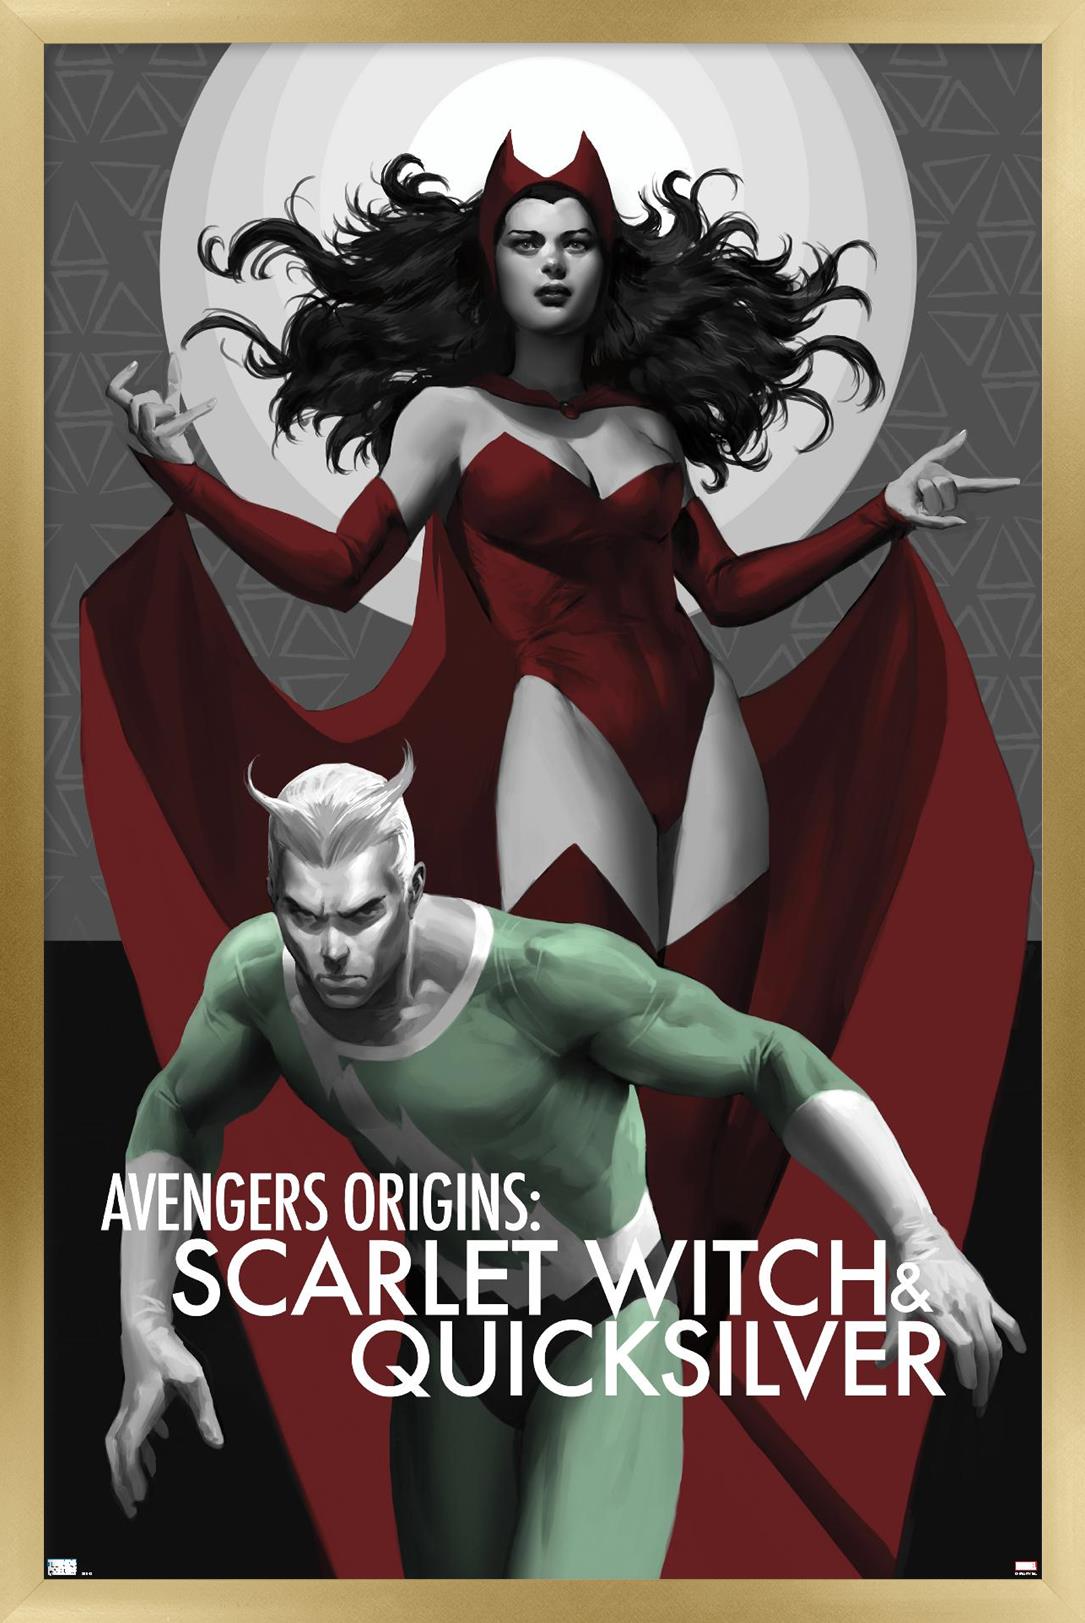 Marvel Comics - Scarlet Witch - The Scarlet Witch & Quicksilver #1 Wall  Poster, 22.375 x 34, Framed